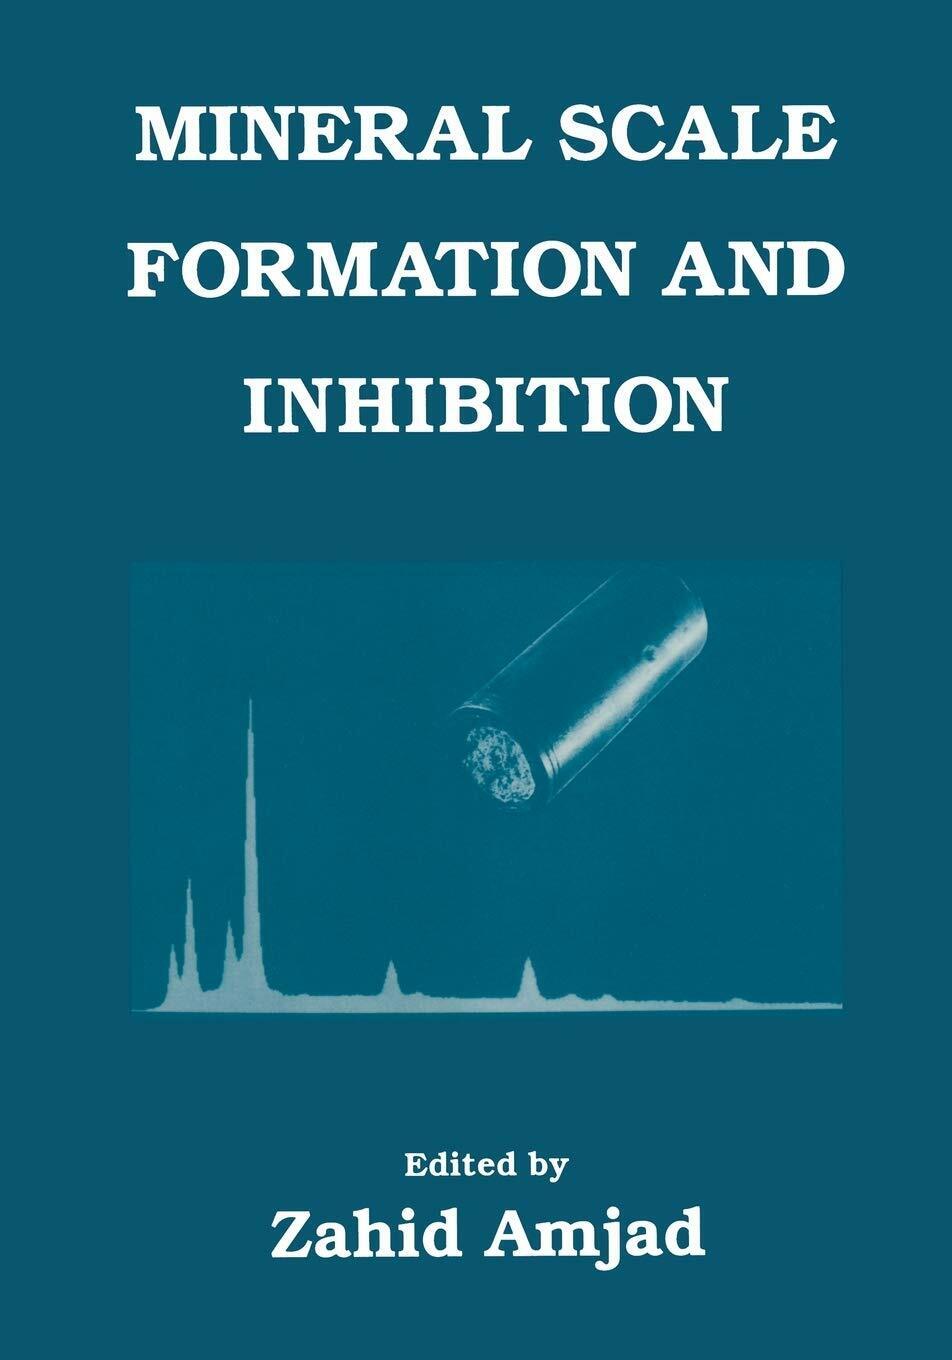 Mineral Scale Formation and Inhibition - Z. Amjad - Springer, 2013 